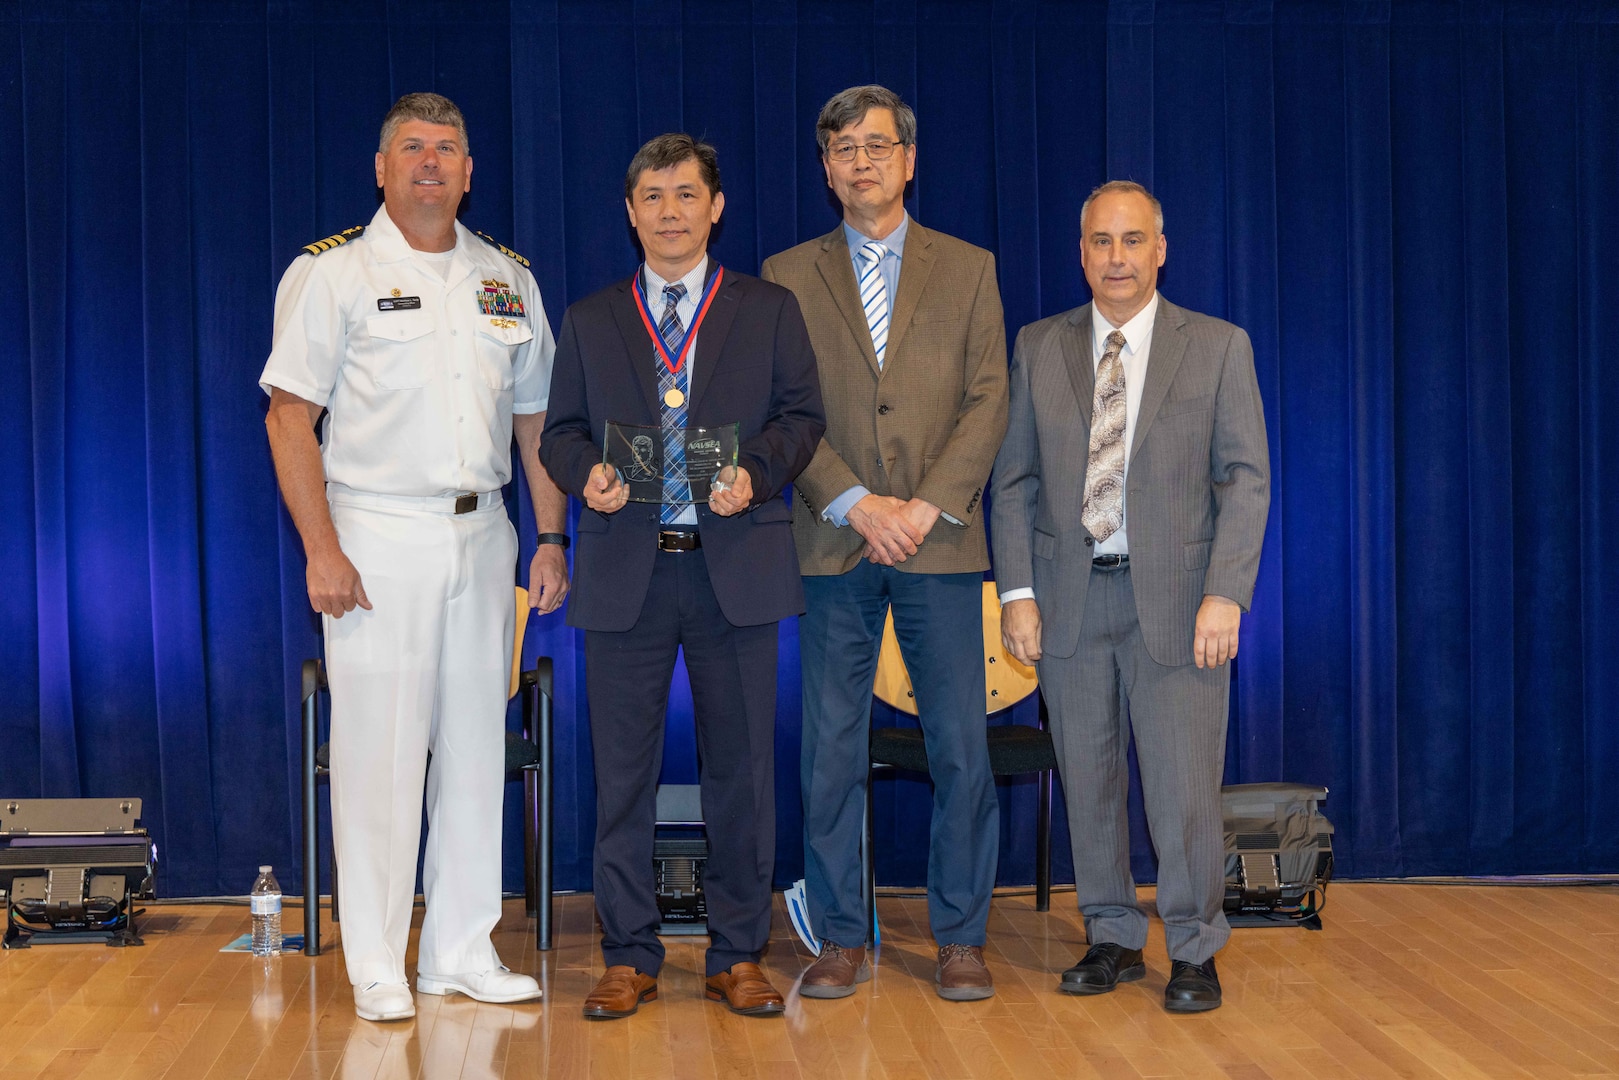 Naval Surface Warfare Center, Carderock Division's Commanding Officer Capt. Matthew Tardy (left), Technical Director Larry Tarasek (right) and Dr. Paul Shang (second to right), the Signatures Department Head, present the Rear Adm. David W. Taylor Award for Outstanding Scientific Achievement to Dr. Kuangcheng Wu, computational methods lead in Carderock’s Structural Acoustics Branch, during Carderock's Magnificent Eight Award ceremony in West Bethesda, Md., on June 13. (U.S. Navy photo by Aaron Thomas)